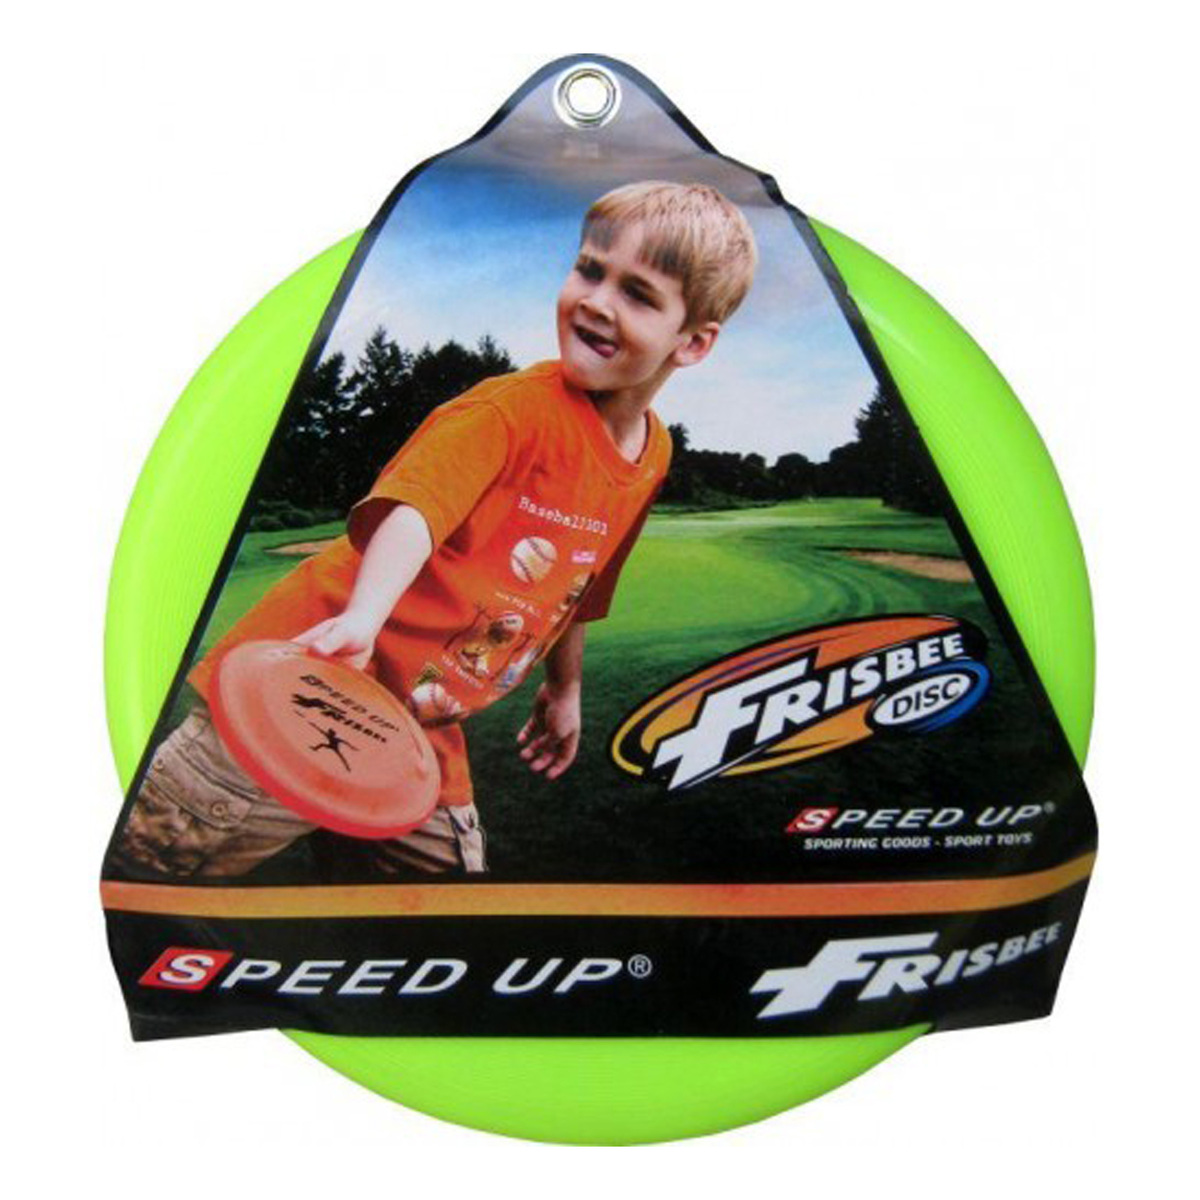 Speed Up Flying Disc SFD-1625 Assorted Colour 1pc